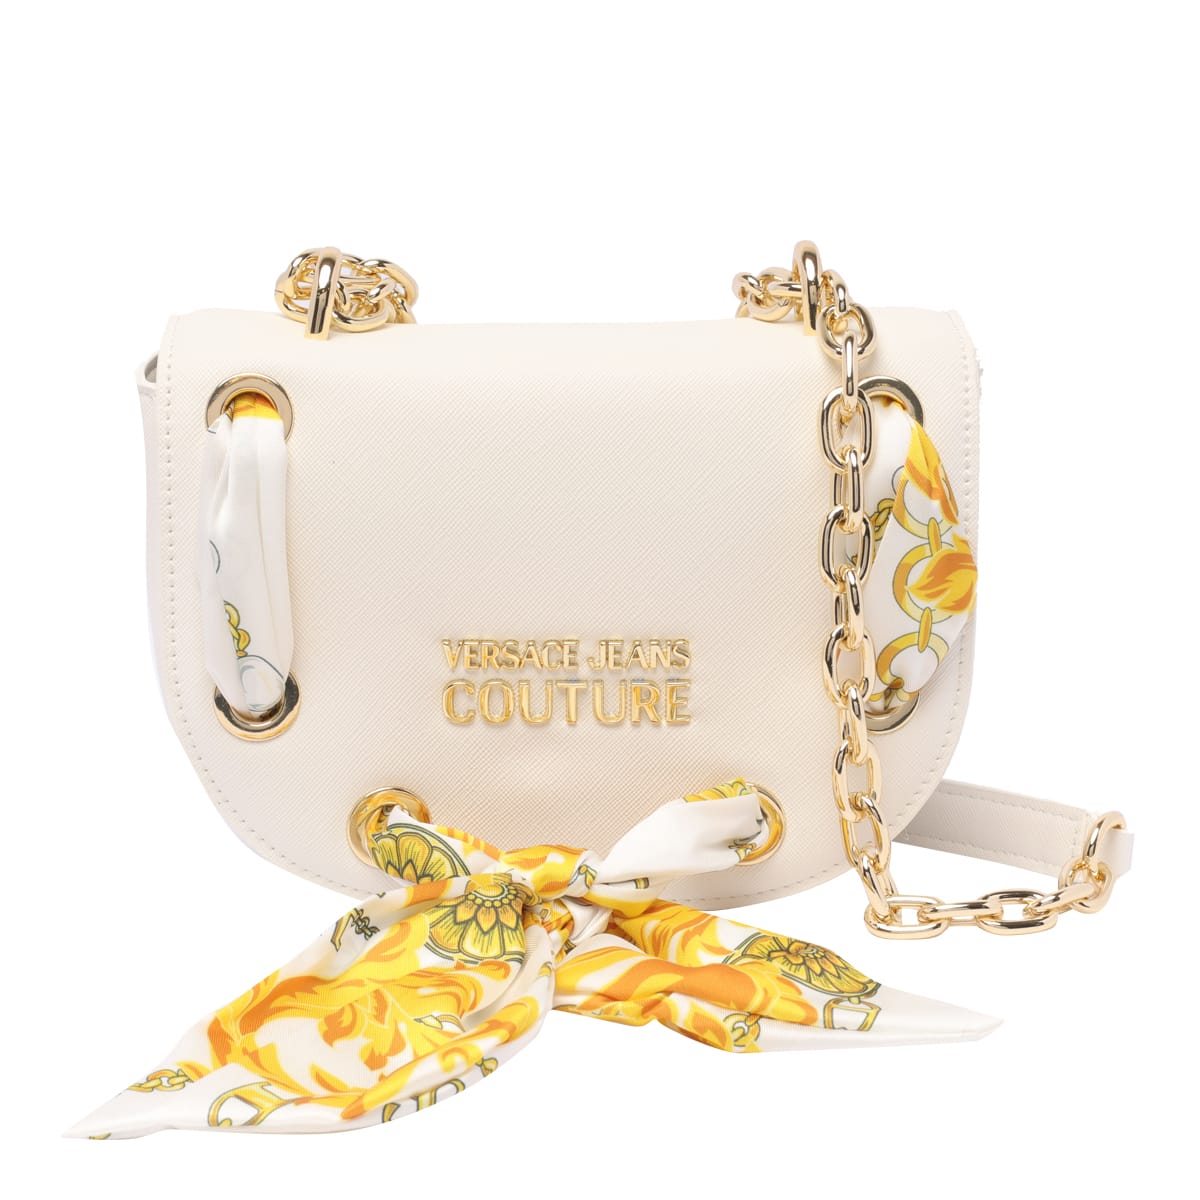 Versace Jeans Couture Chain Couture 1 Shoulder Bag In White